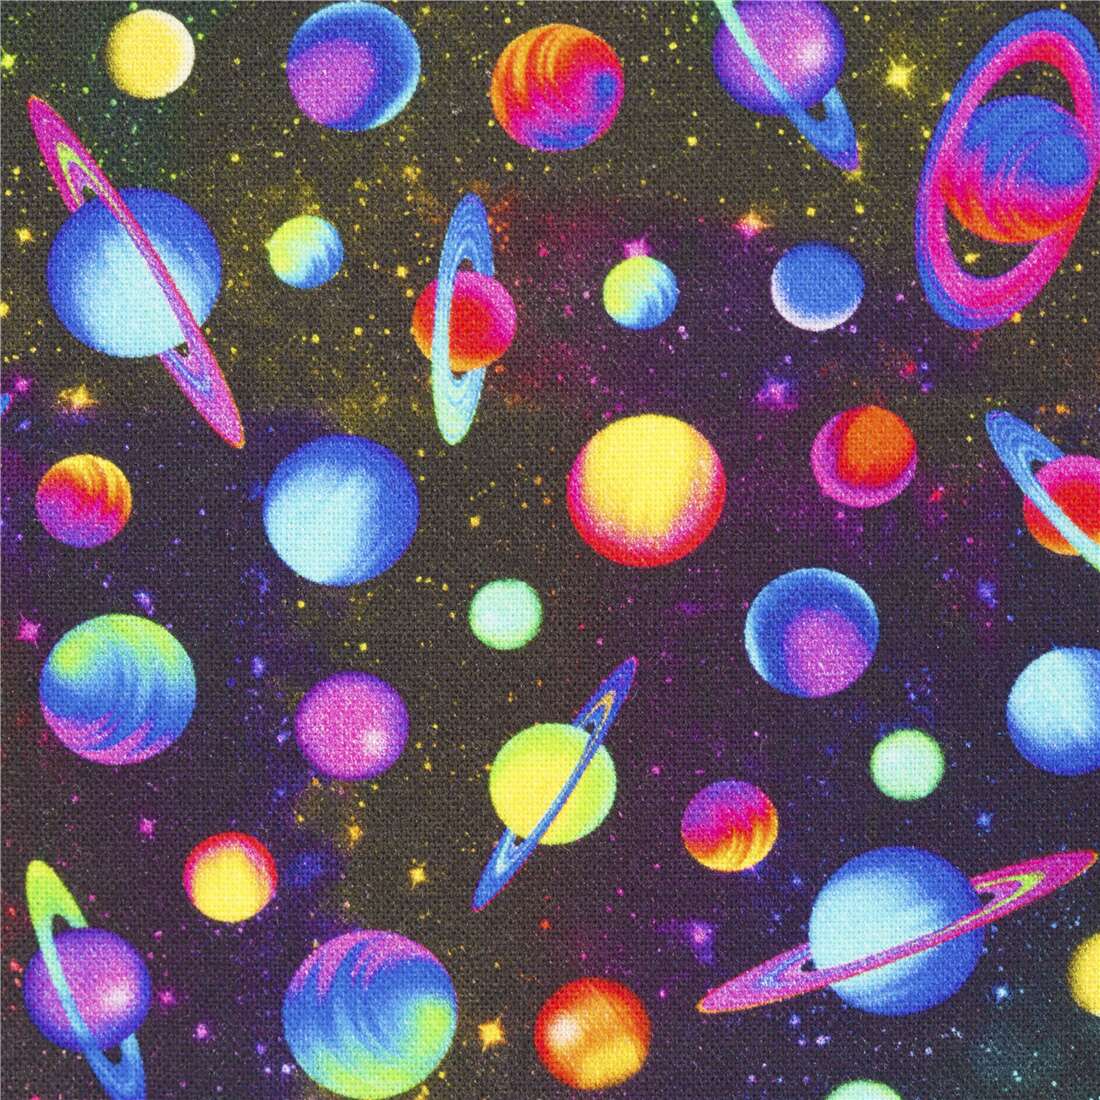 Mini Rainbow Space Planets Rings Fabric by Timeless Treasures - modeS4u